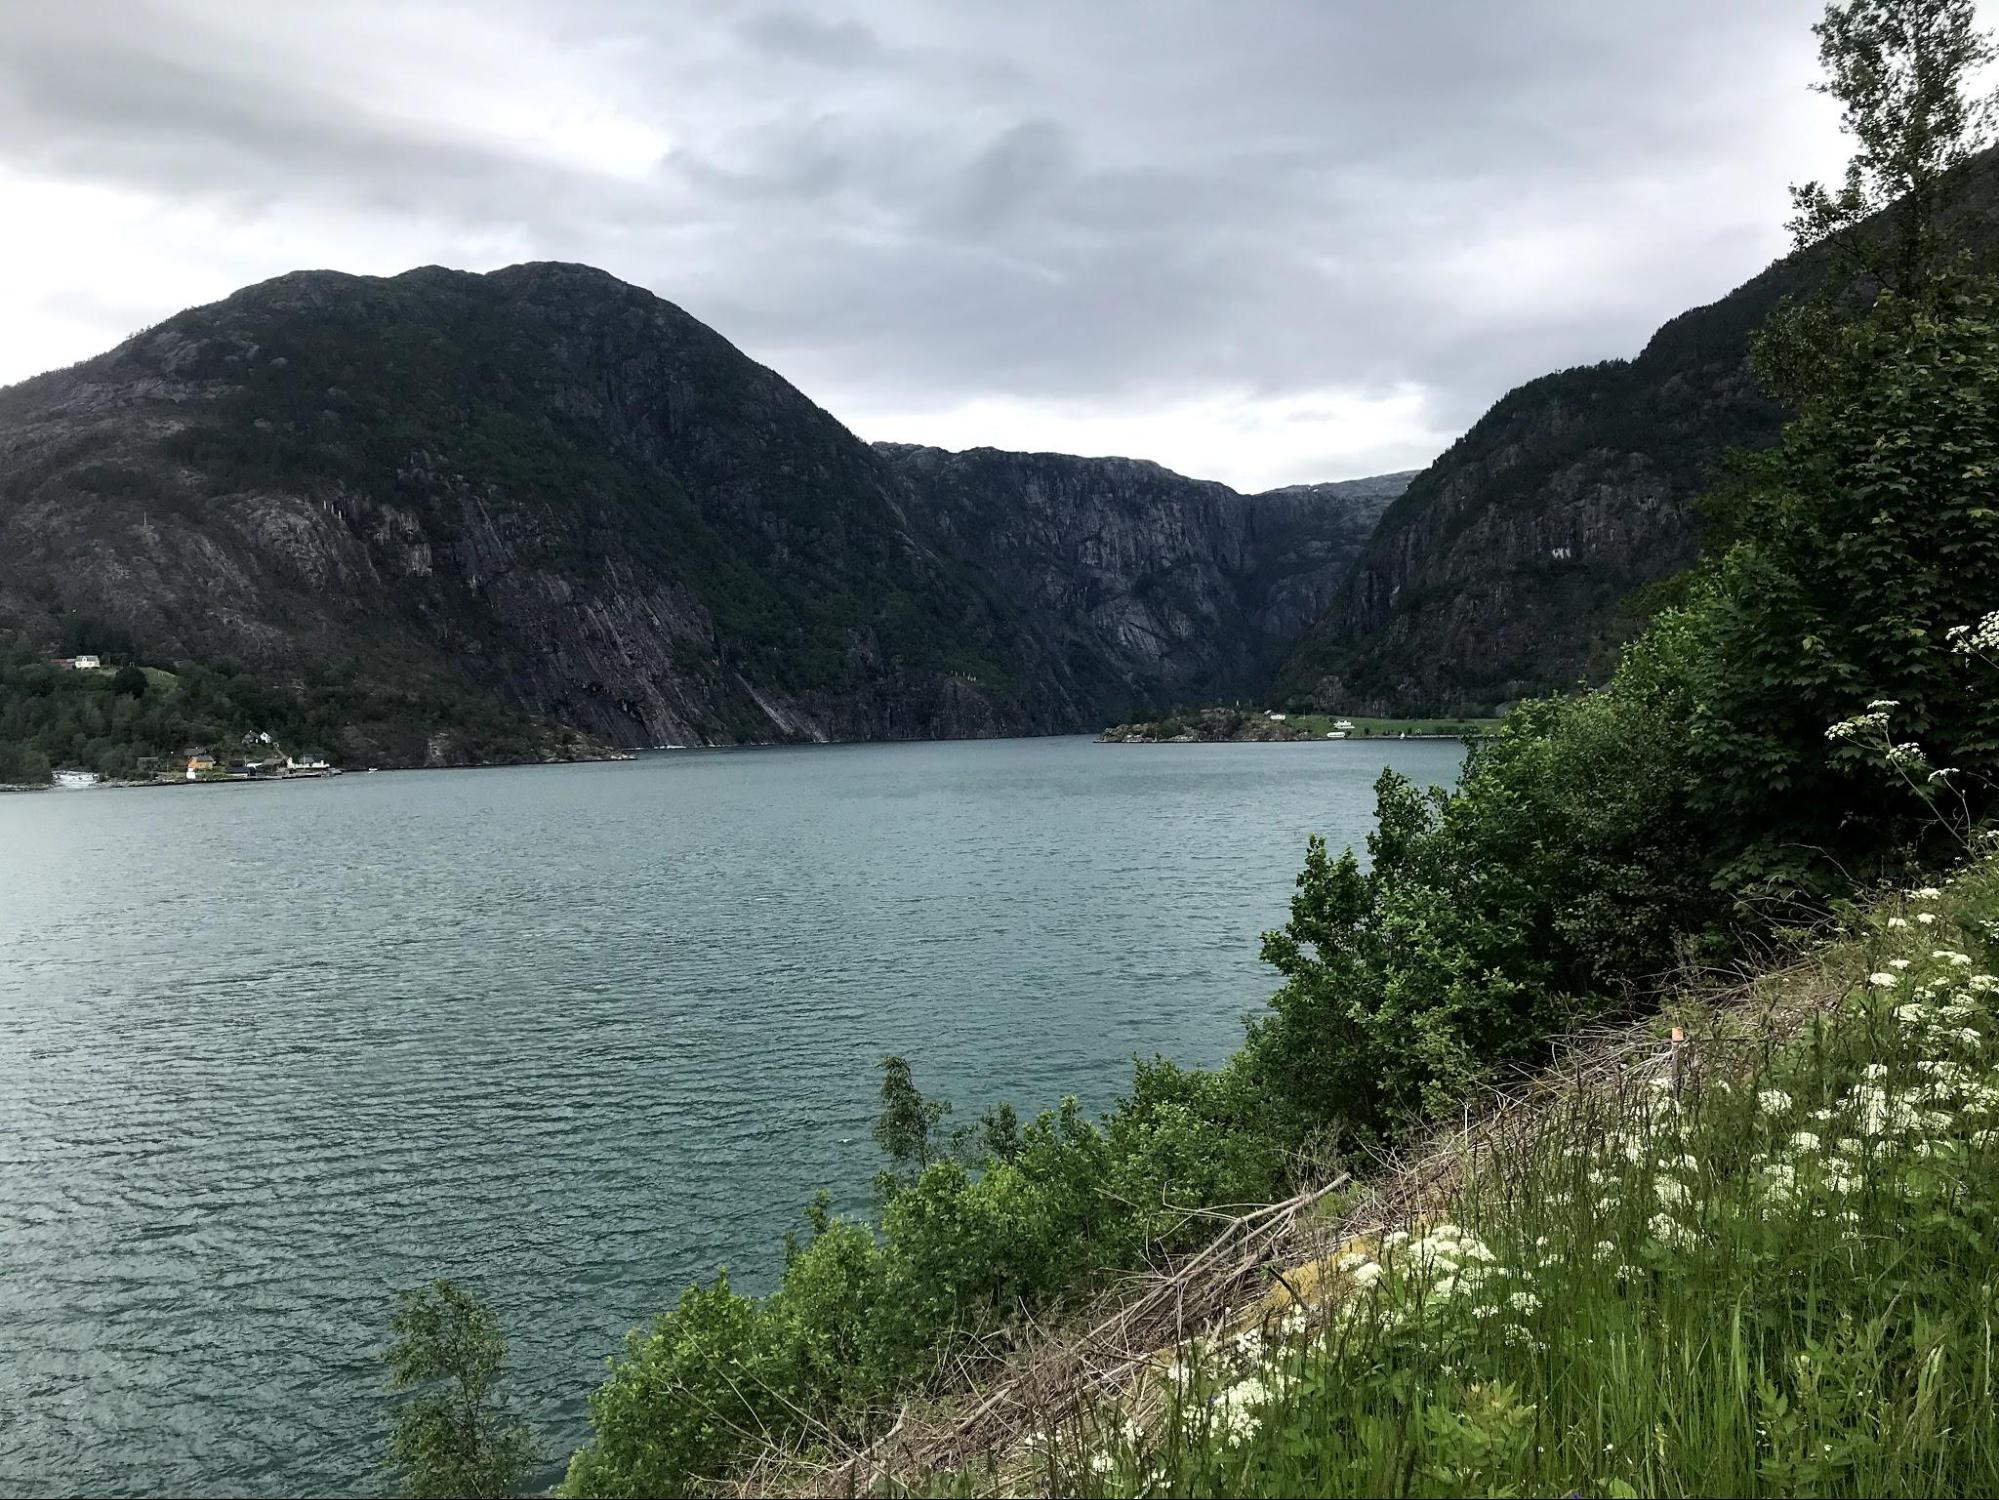 We continued our breathtaking road trip back around through Norway